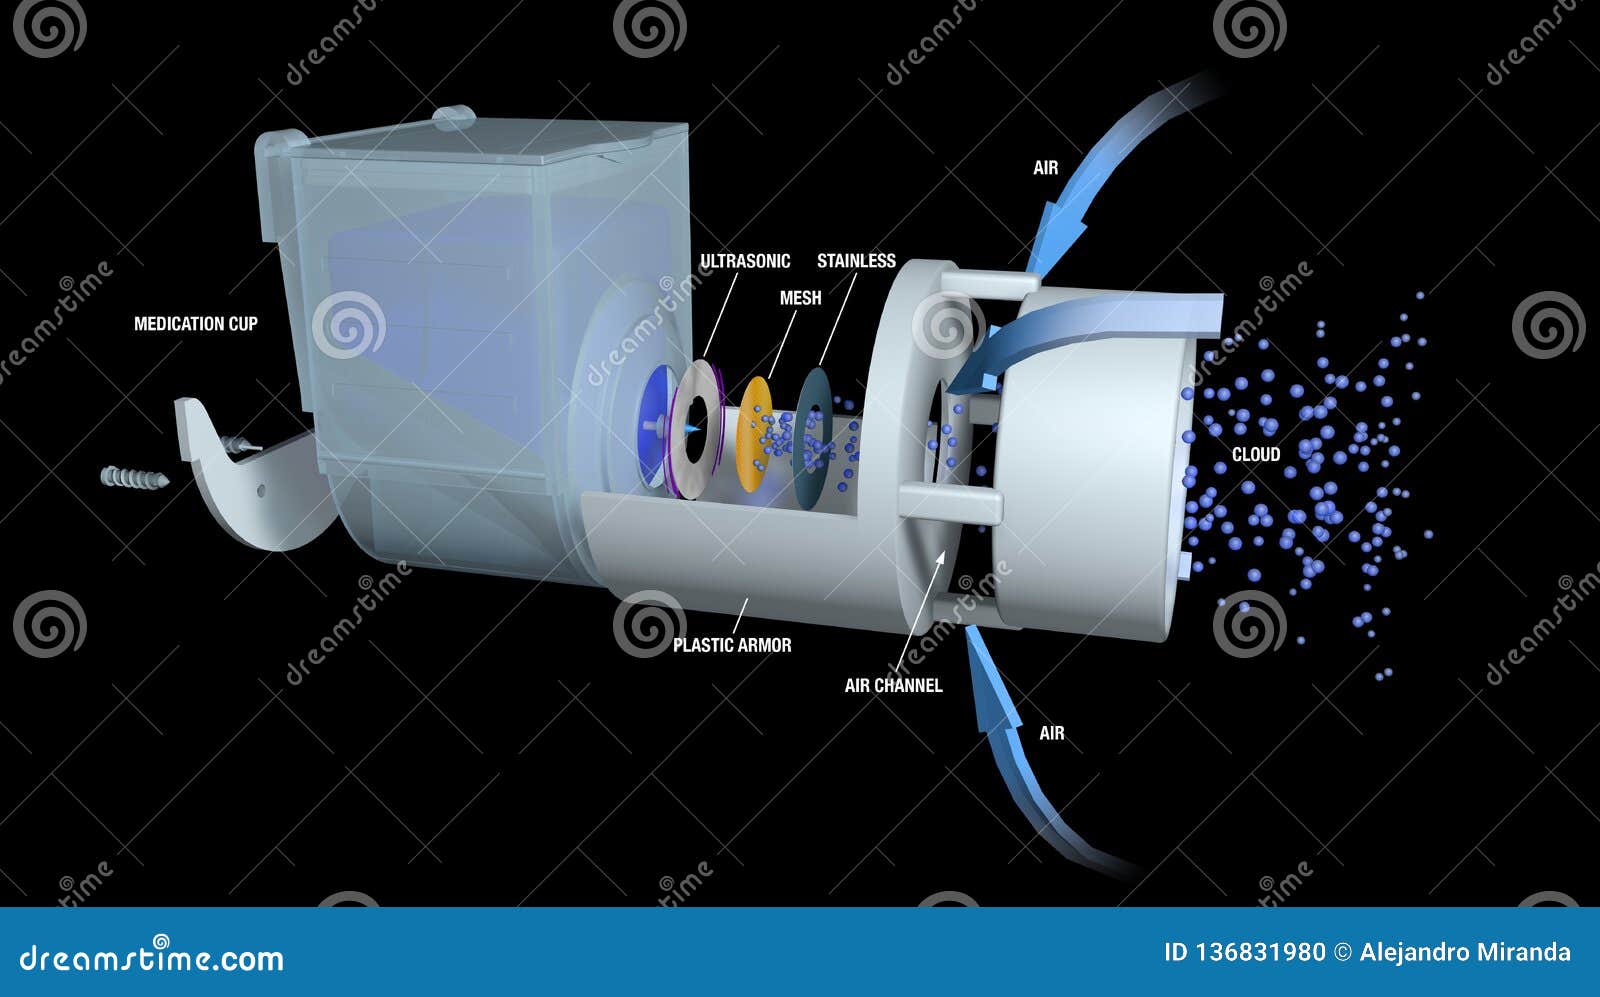 descriptive drawing of how a portable nebulizer works for the treatment of asthma on a black background.